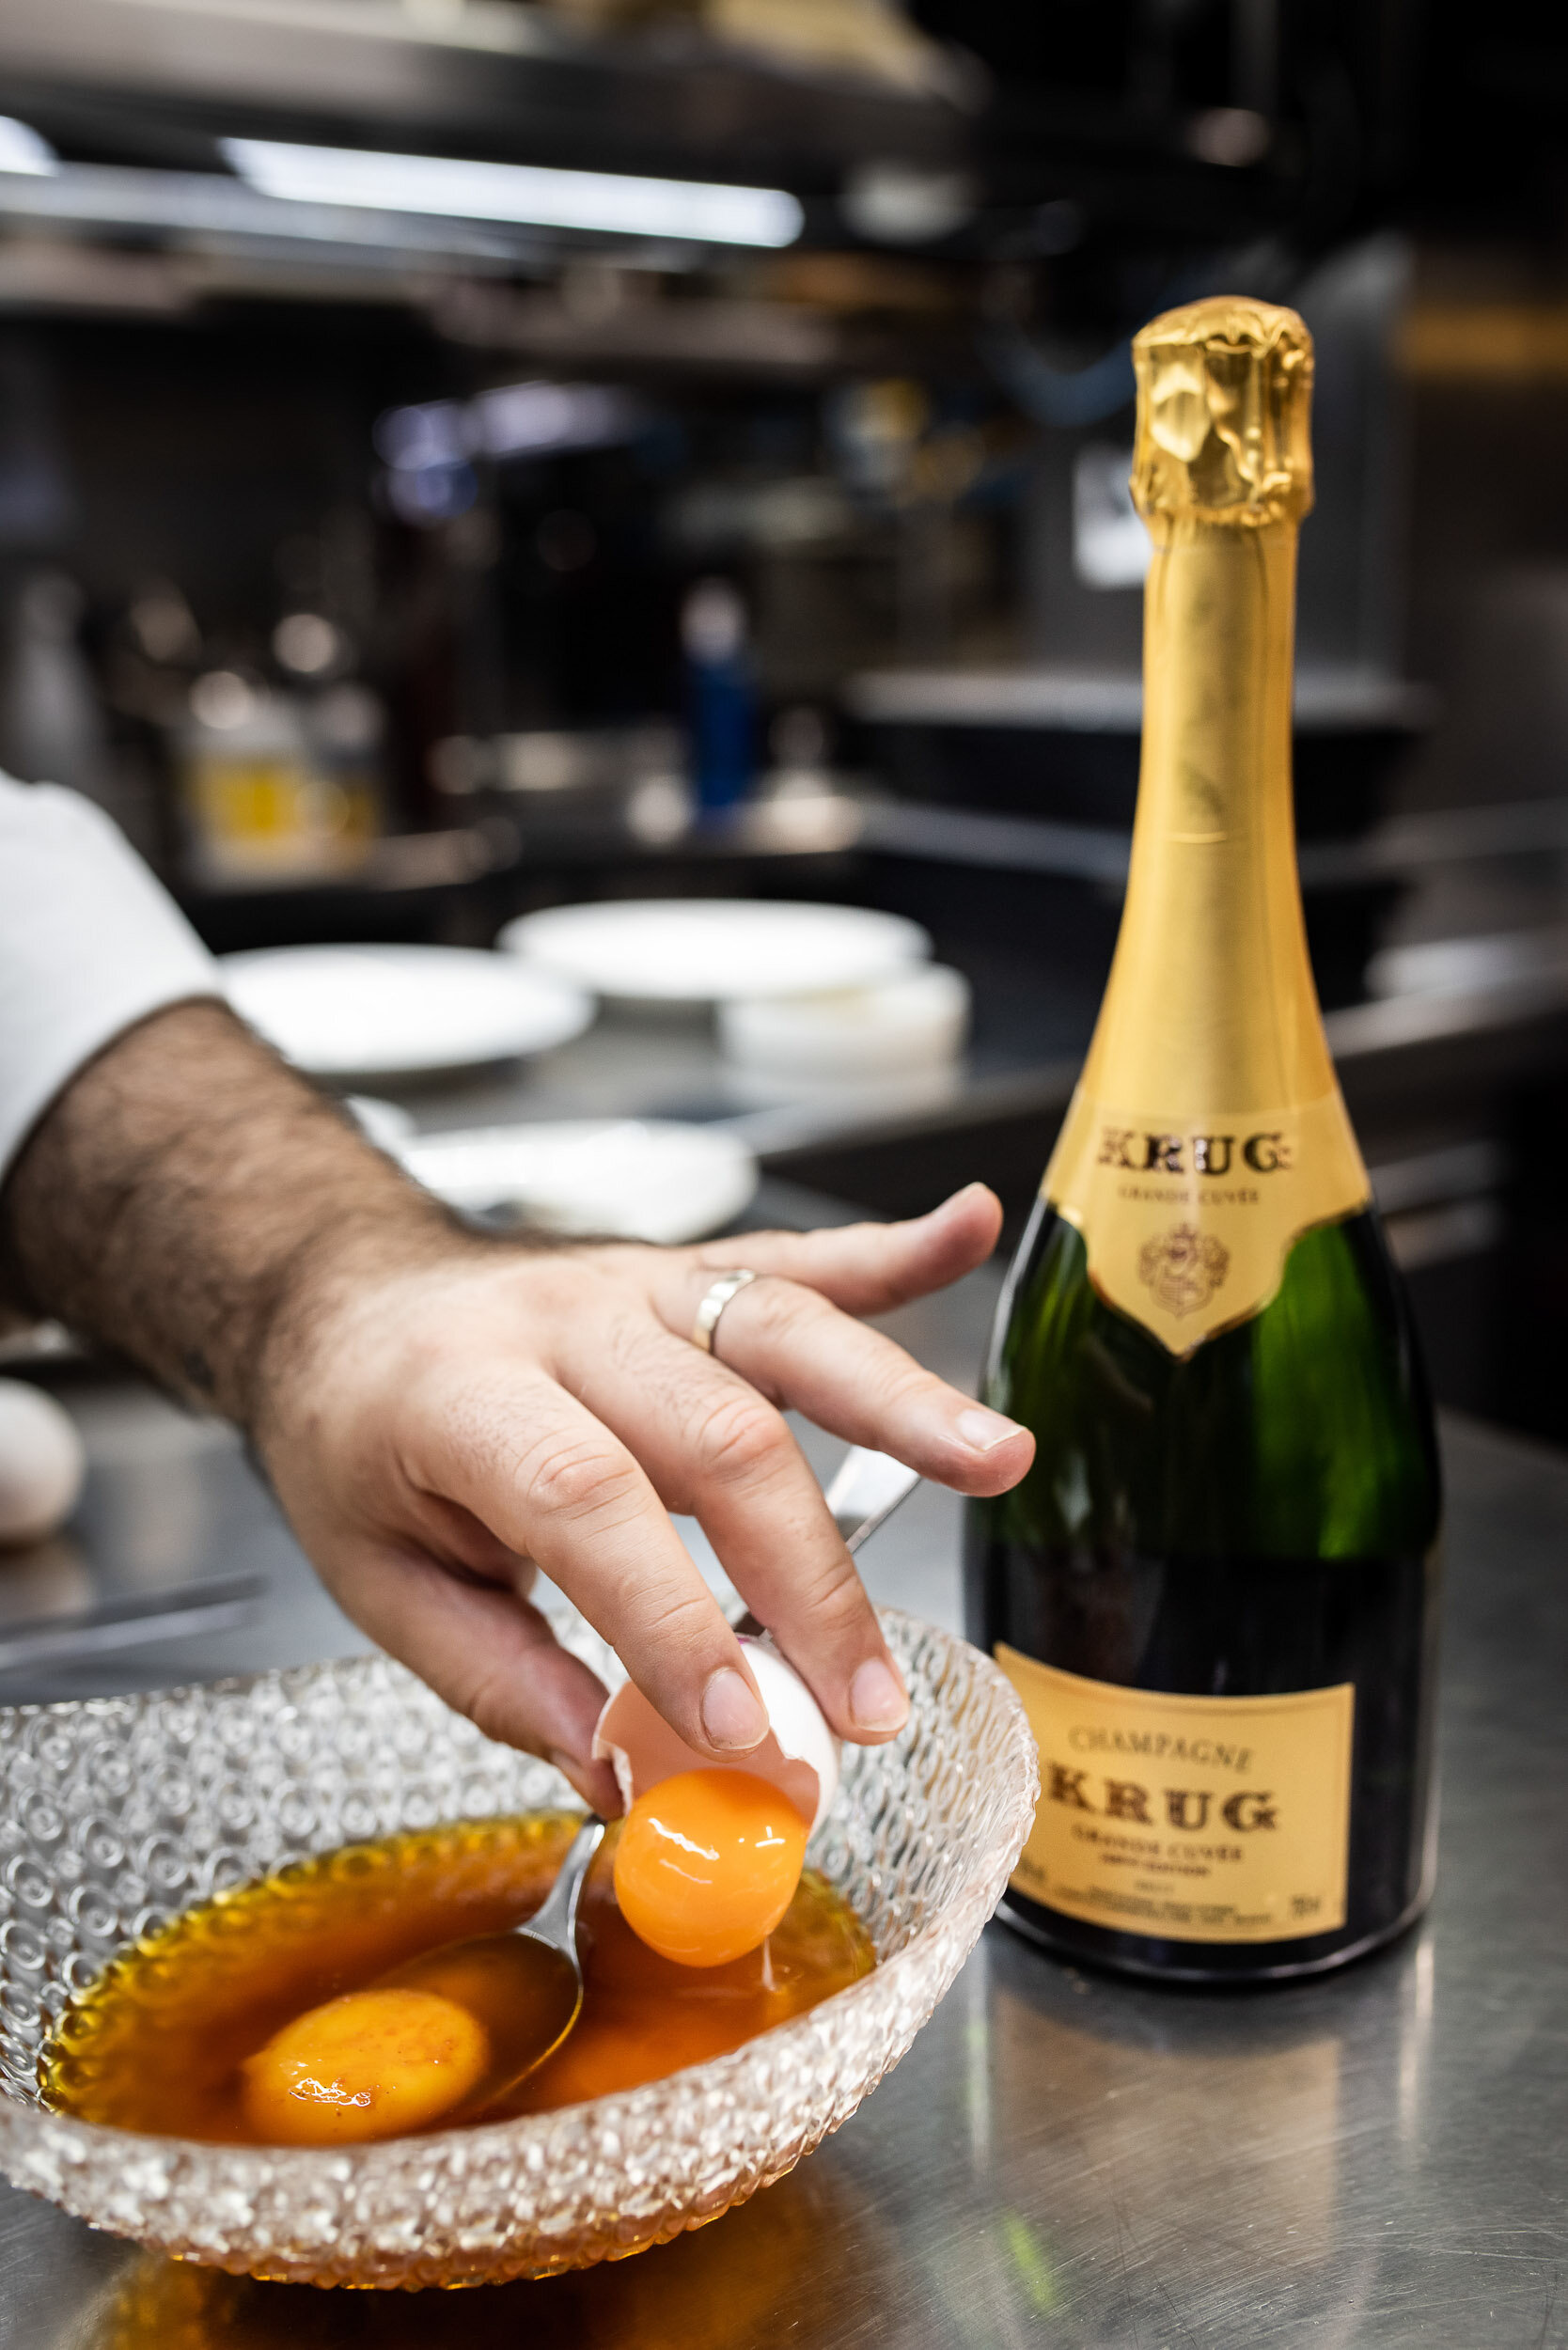 Krug celebrates the lemon and publishes special cookbook by international  Chefs - LVMH